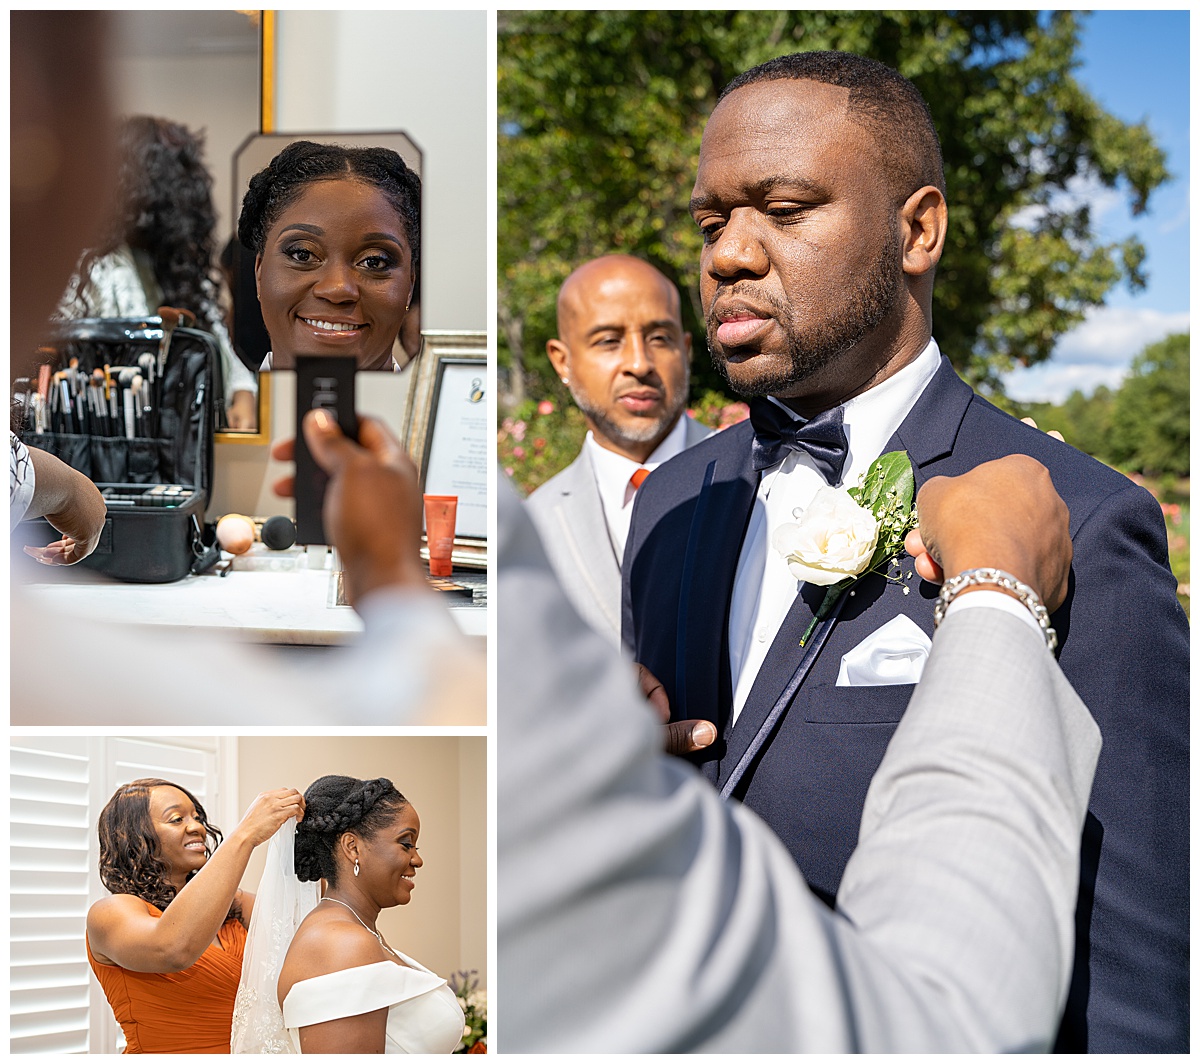 Left to right: Bride looks at her makeup in the mirror. Groom is helped by groomsmen. Bridesmaid puts veil on bride.